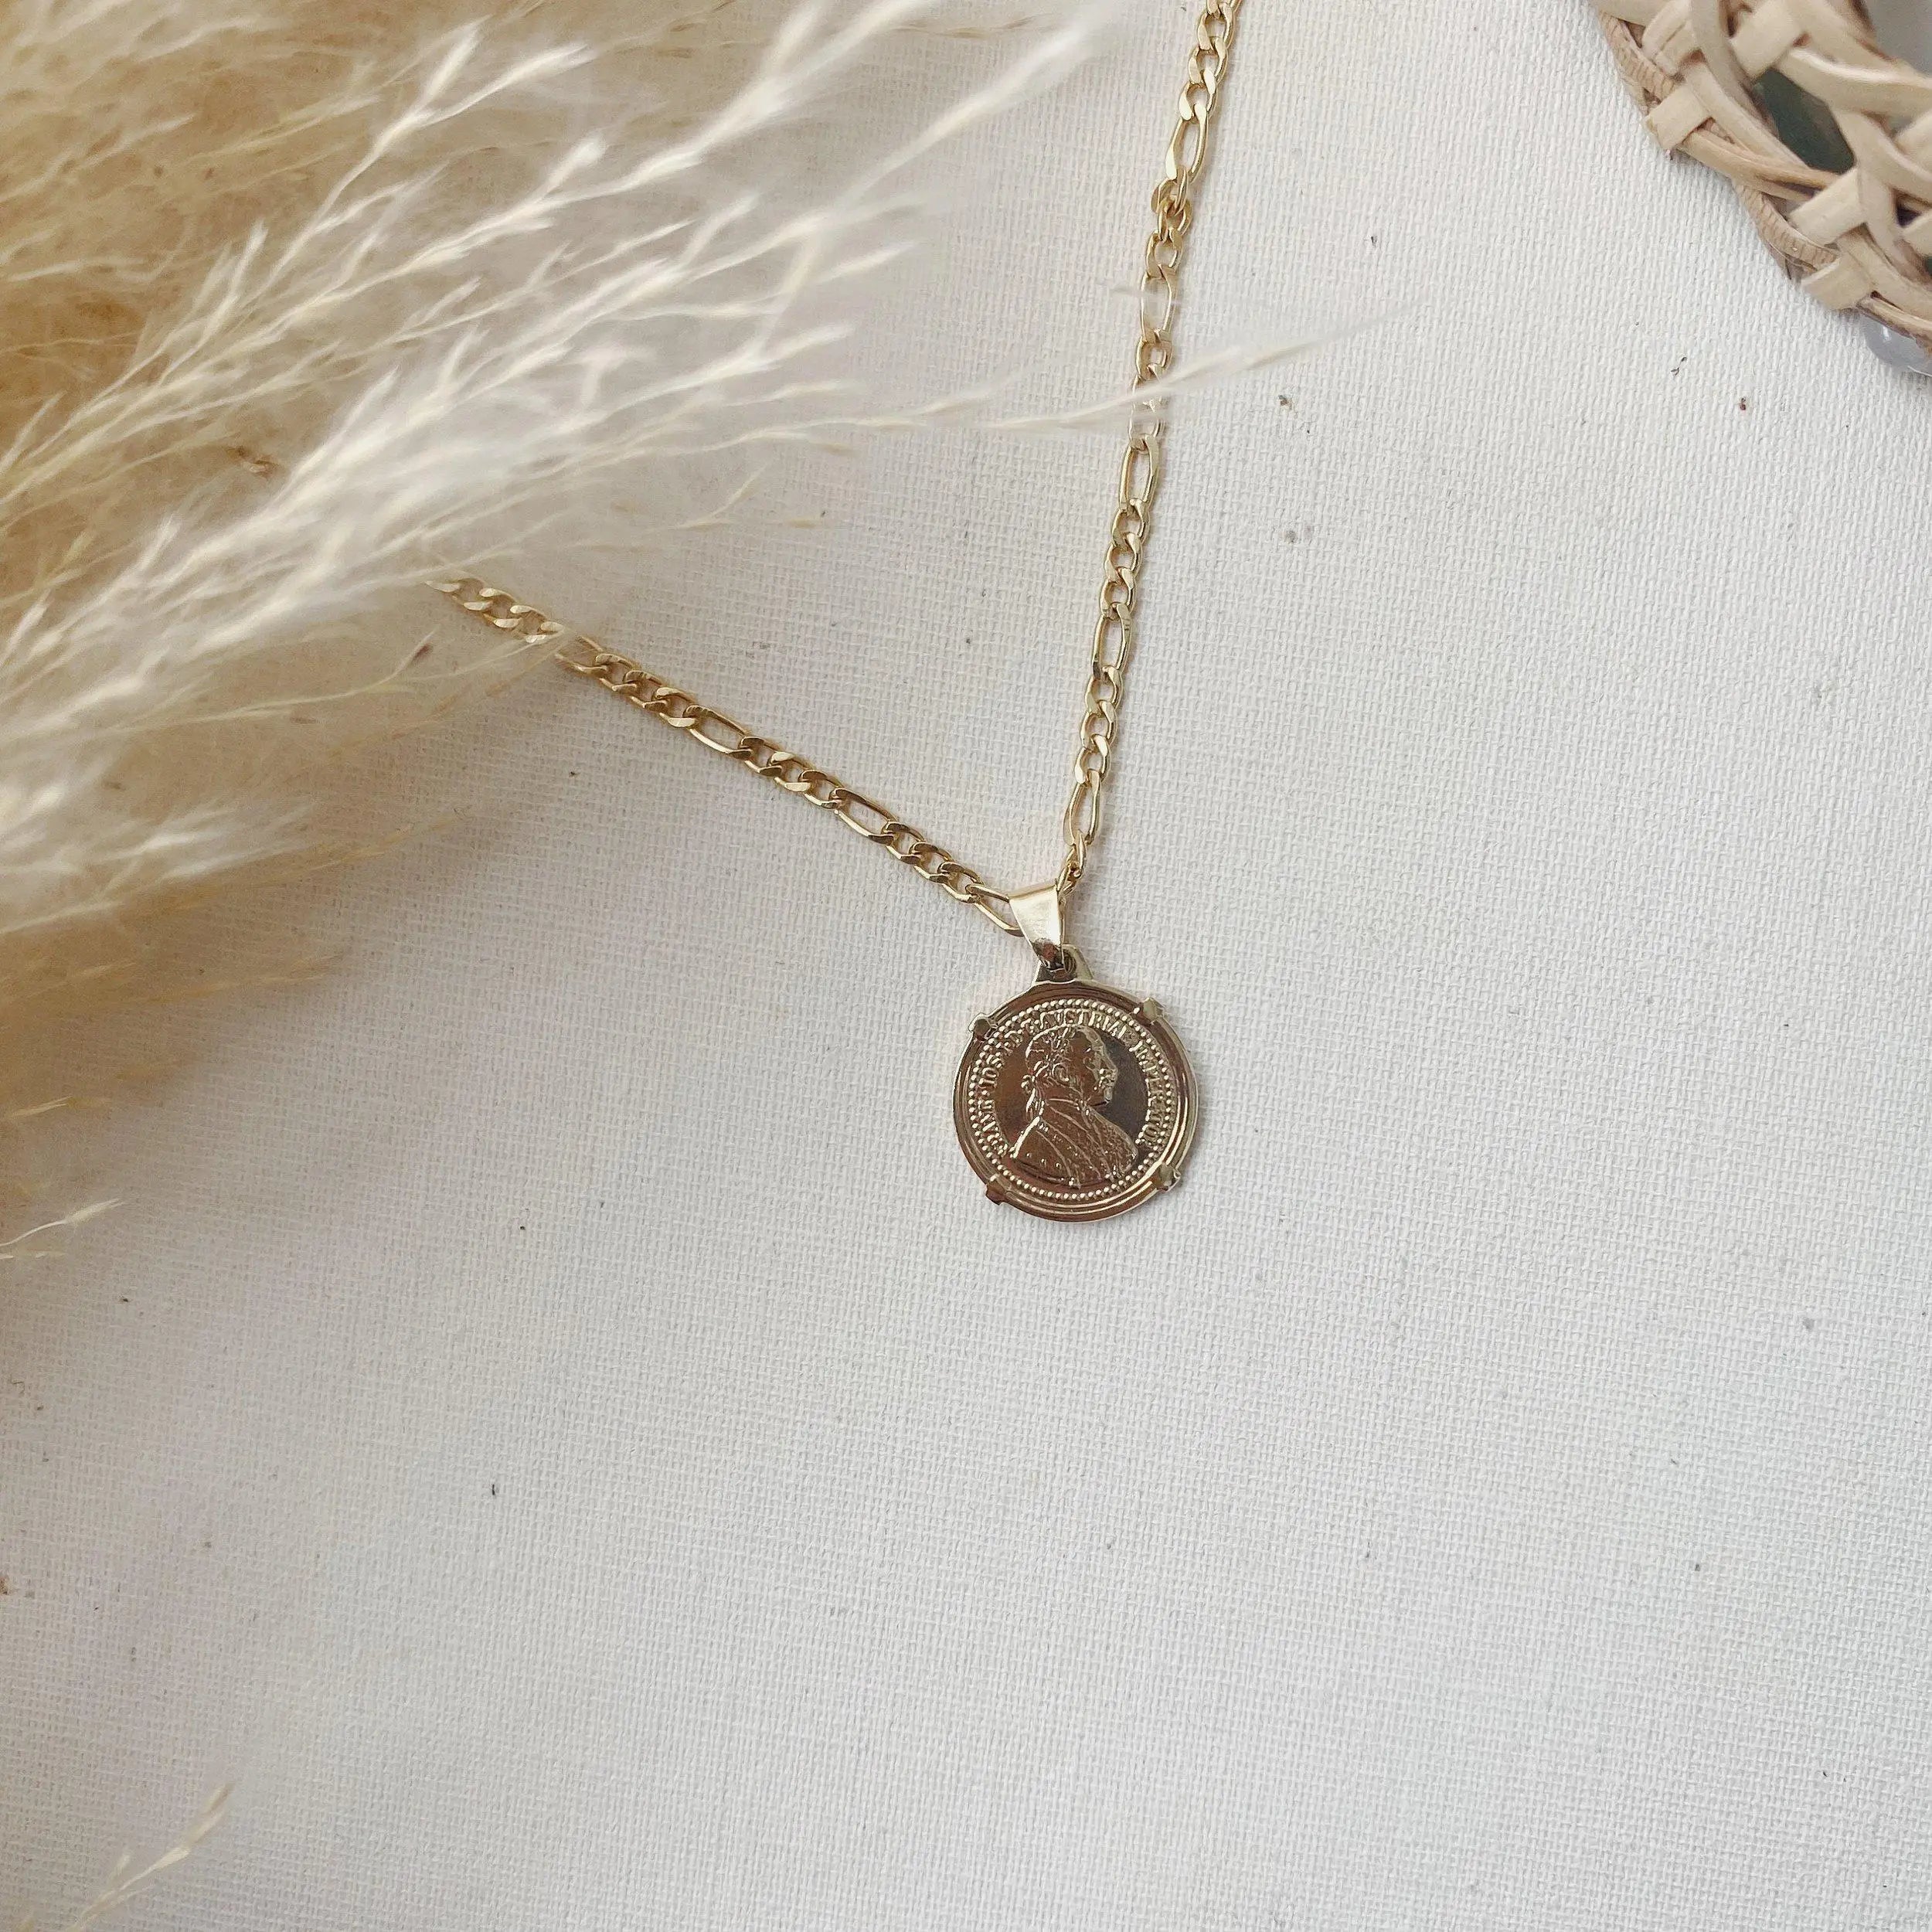 vintage coin necklace by Sydney Rose Co.